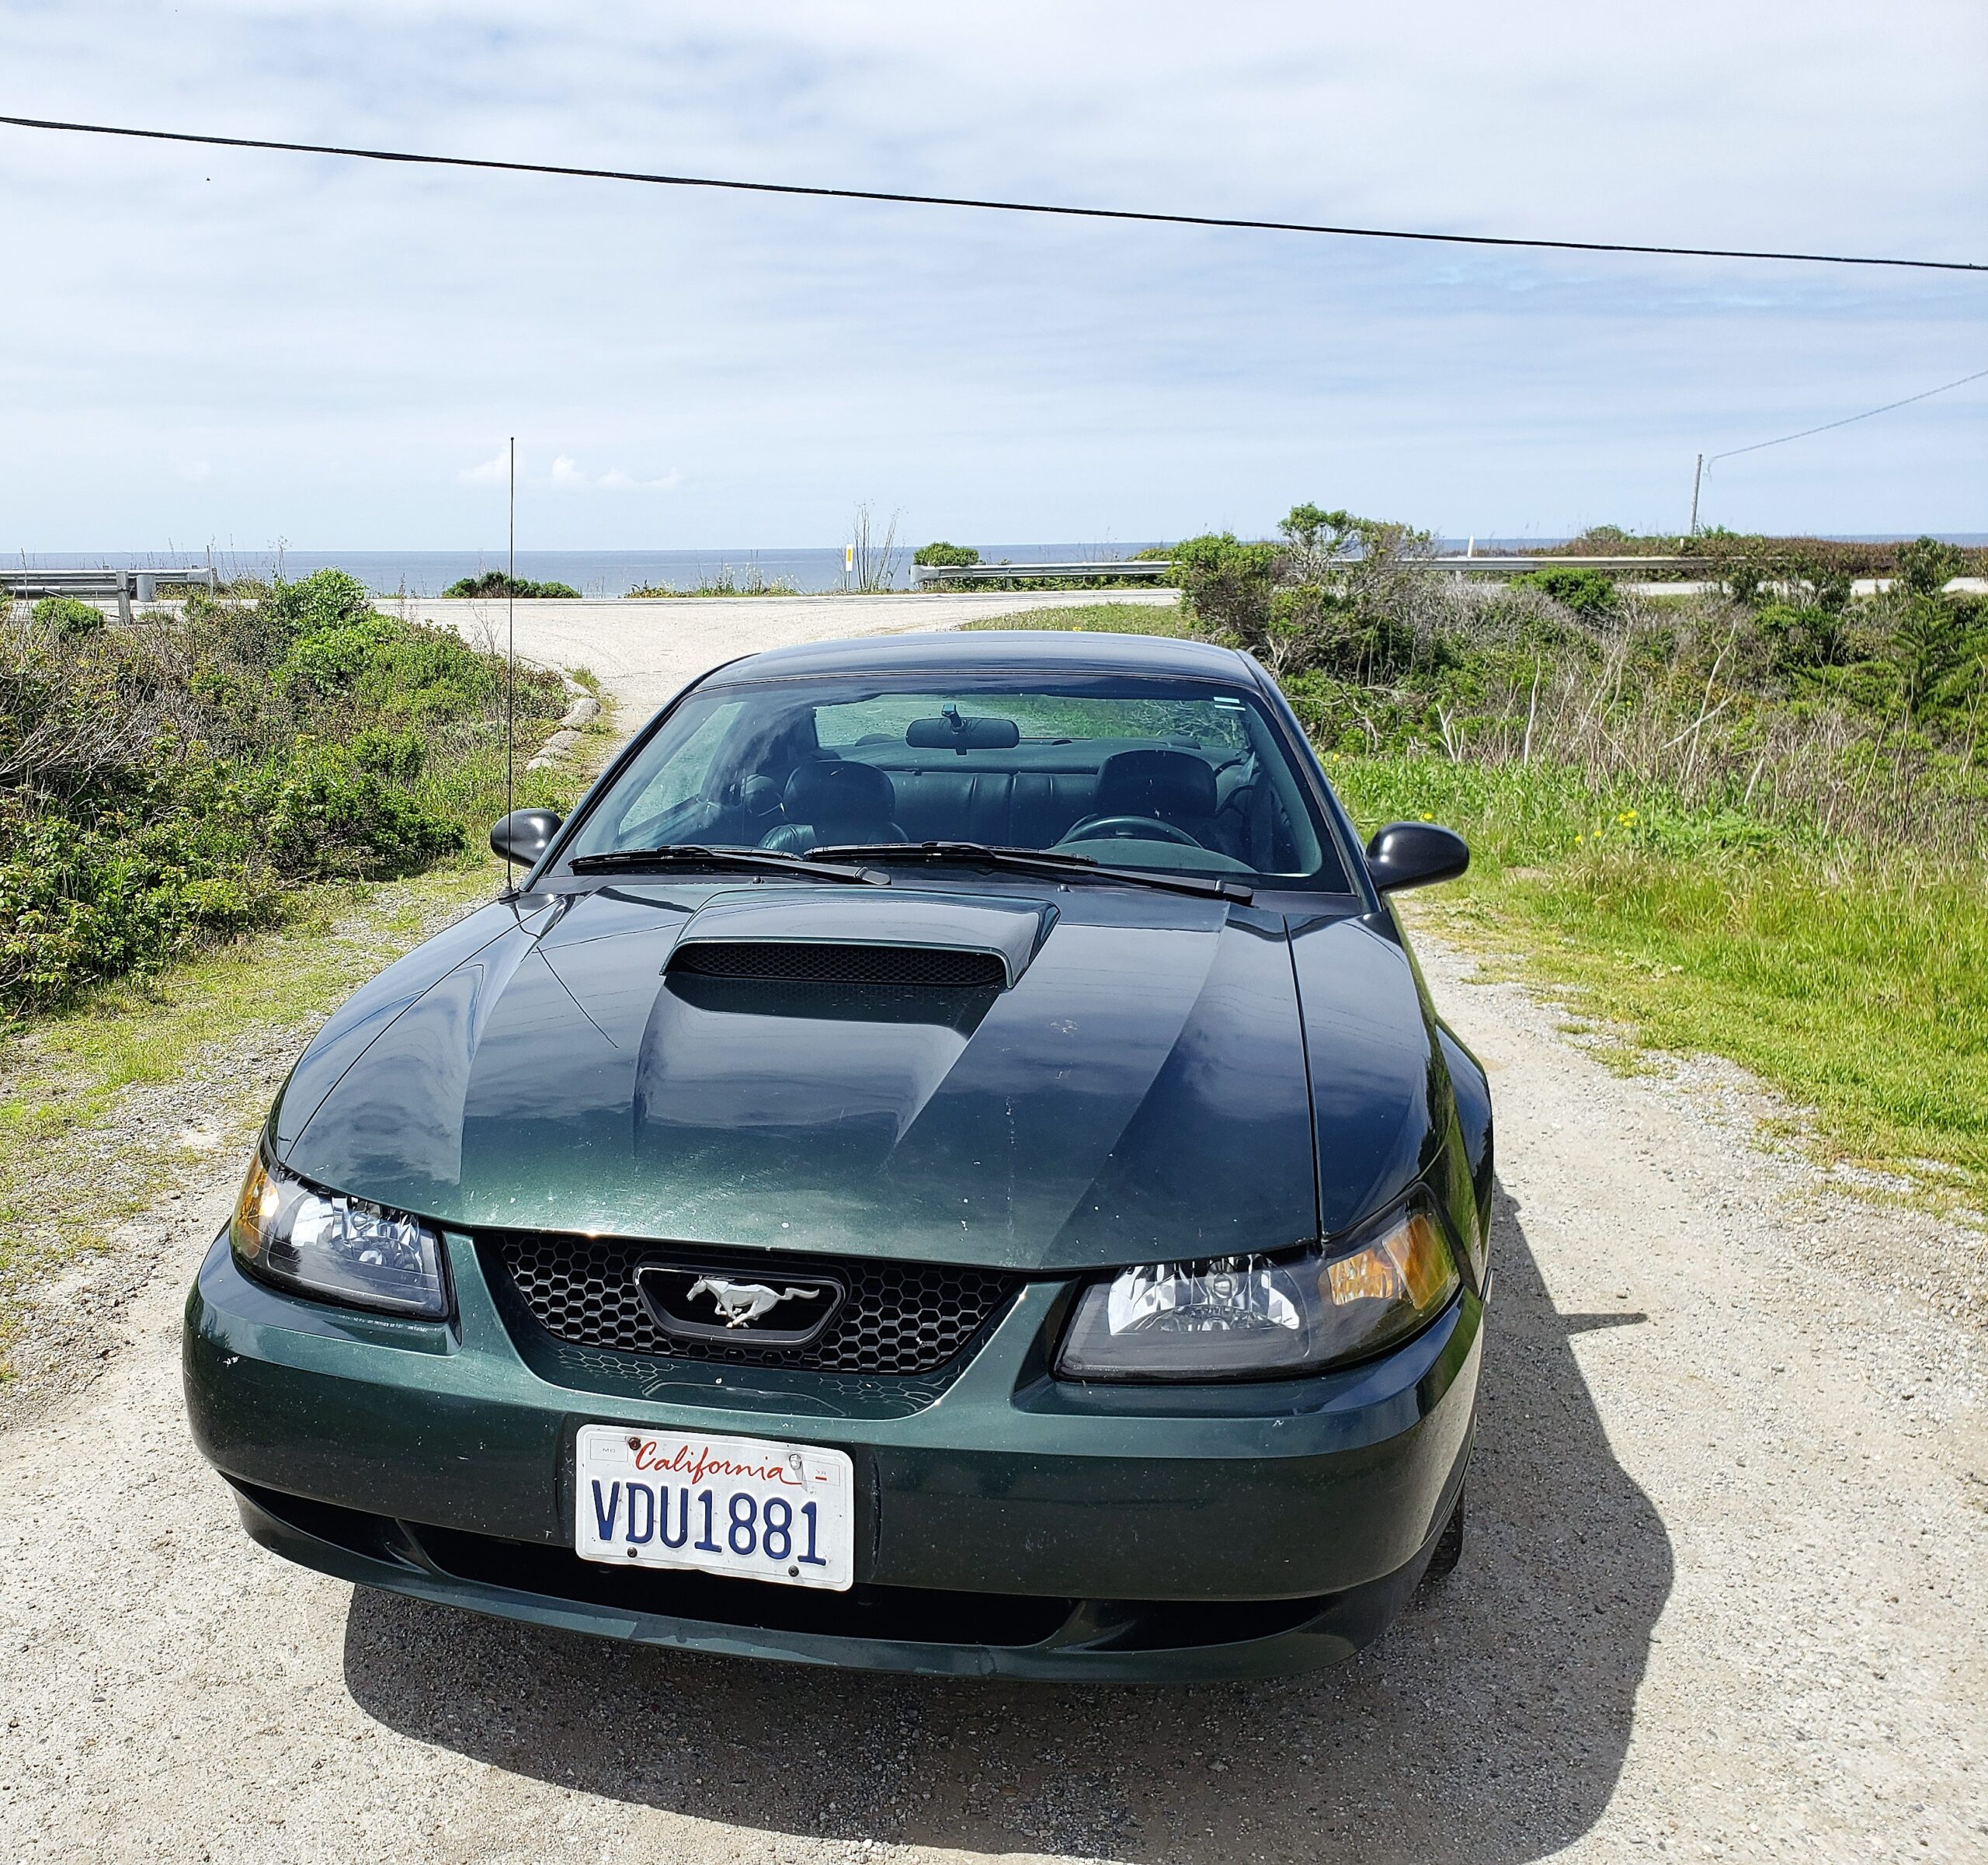 Driving In Covid #1: An Old Ford Mustang